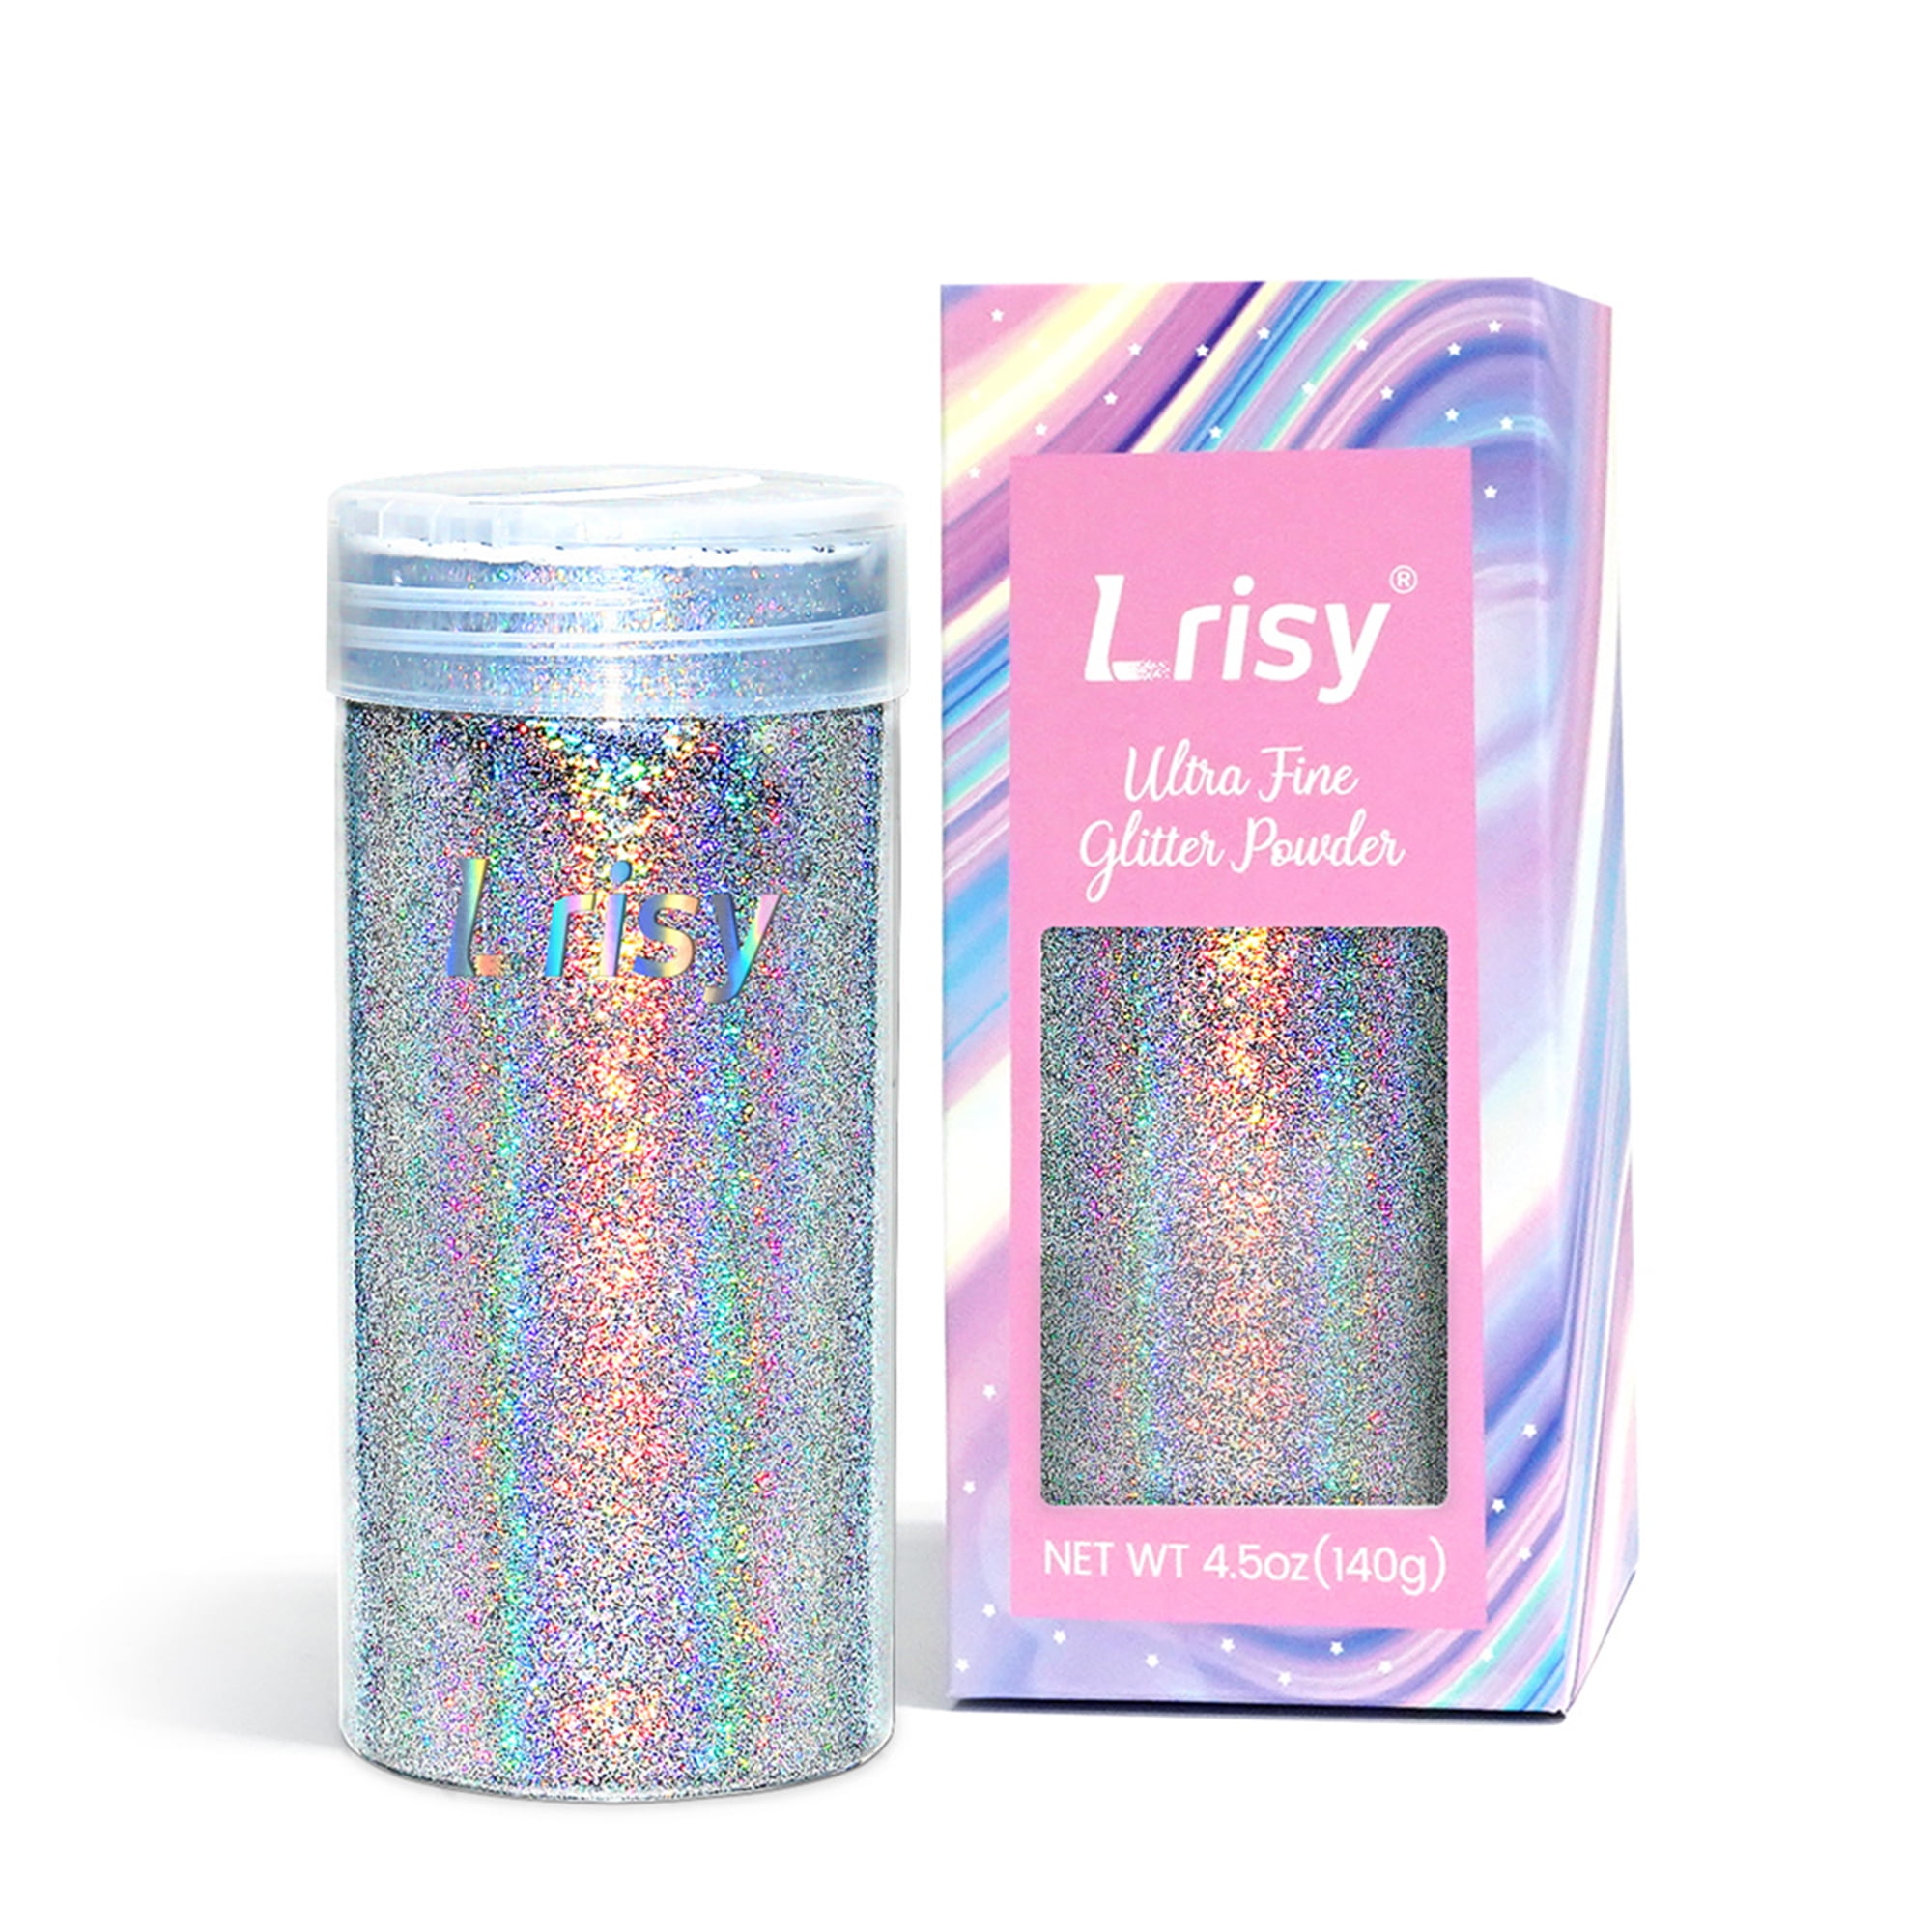 Holographic Fine Glitter, 150g Multipurpose Gold Extra Fine Craft Glitter  for Resin Arts and Crafts, Body Nail Art Eye Face Hair, Holographic Glitter  for Epoxy Tumbler, Slime Making (Gold)